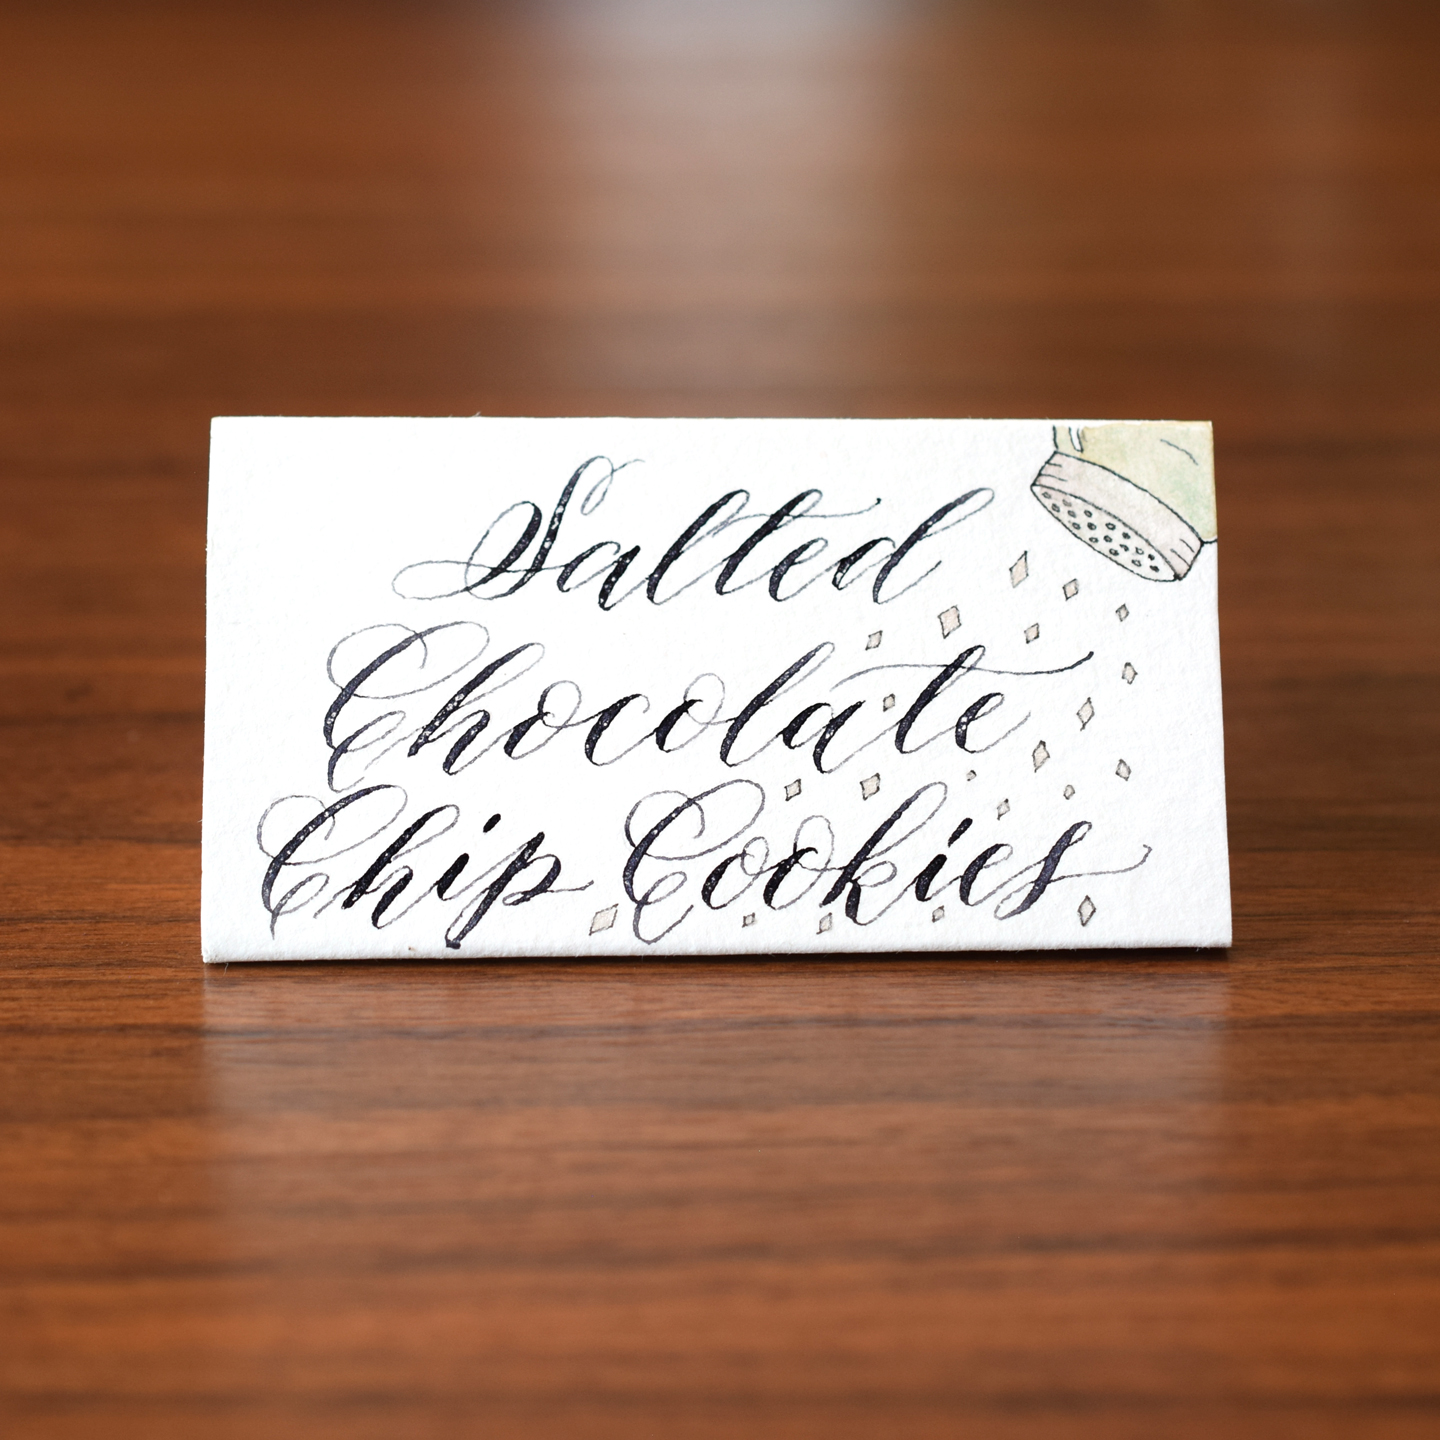 10 Artistic Ideas for Holiday Place Cards